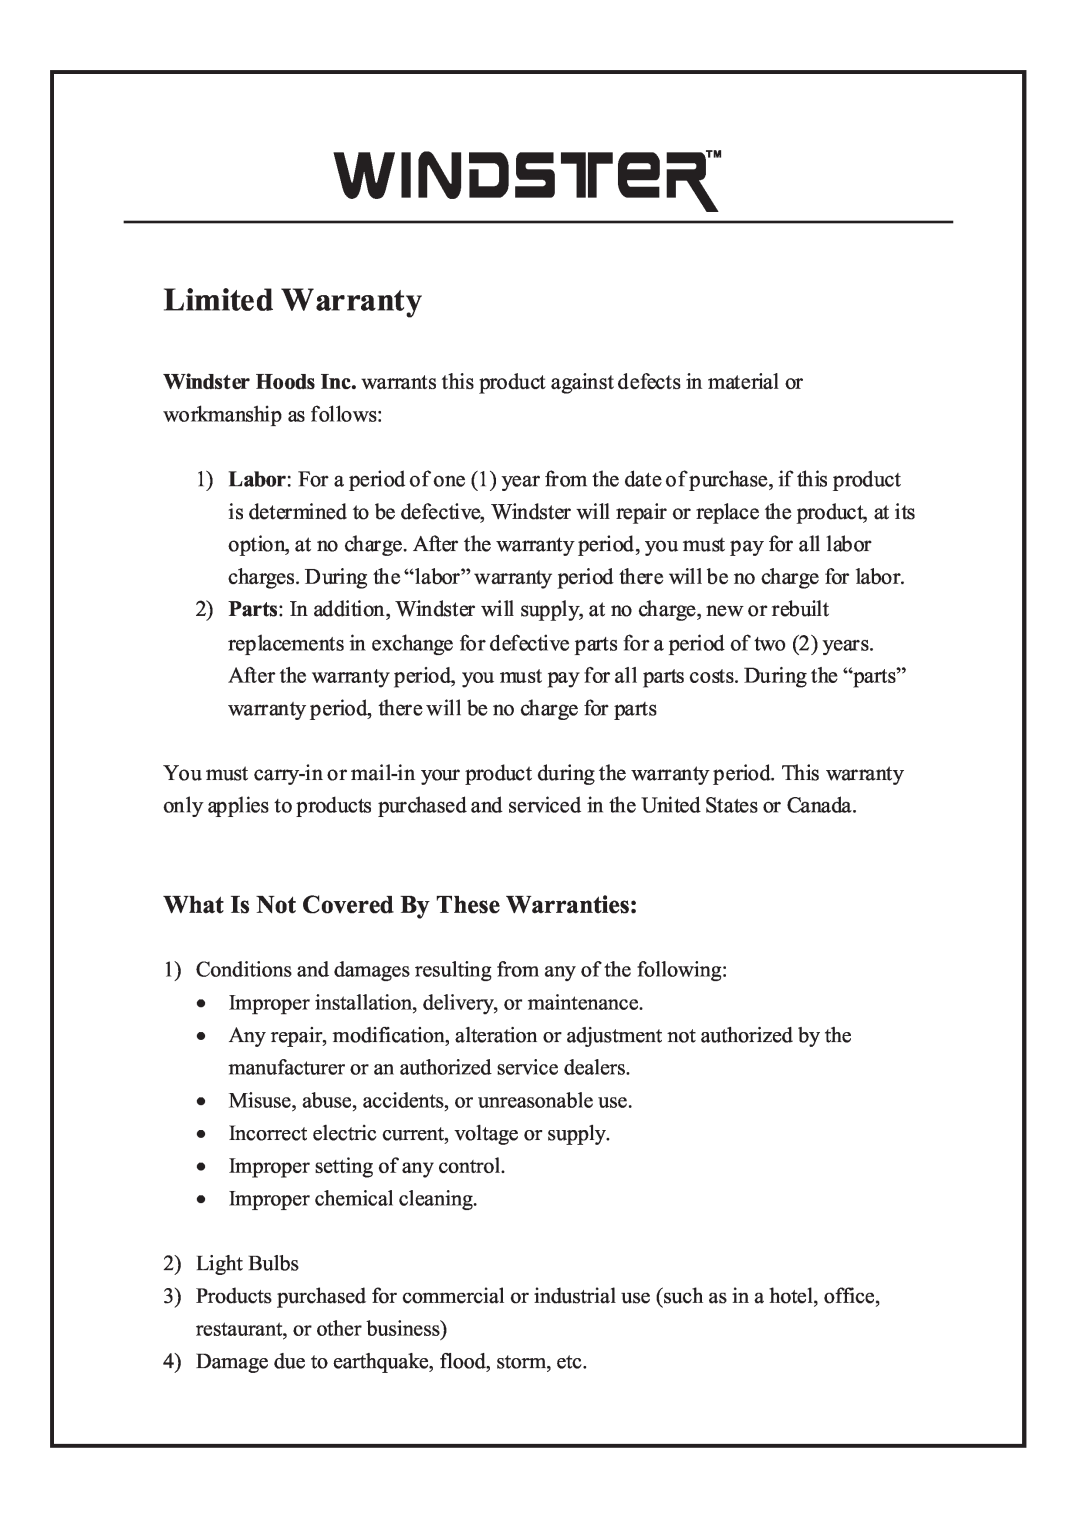 Windster WS-38 manual What Is Not Covered By These Warranties, Limited Warranty 